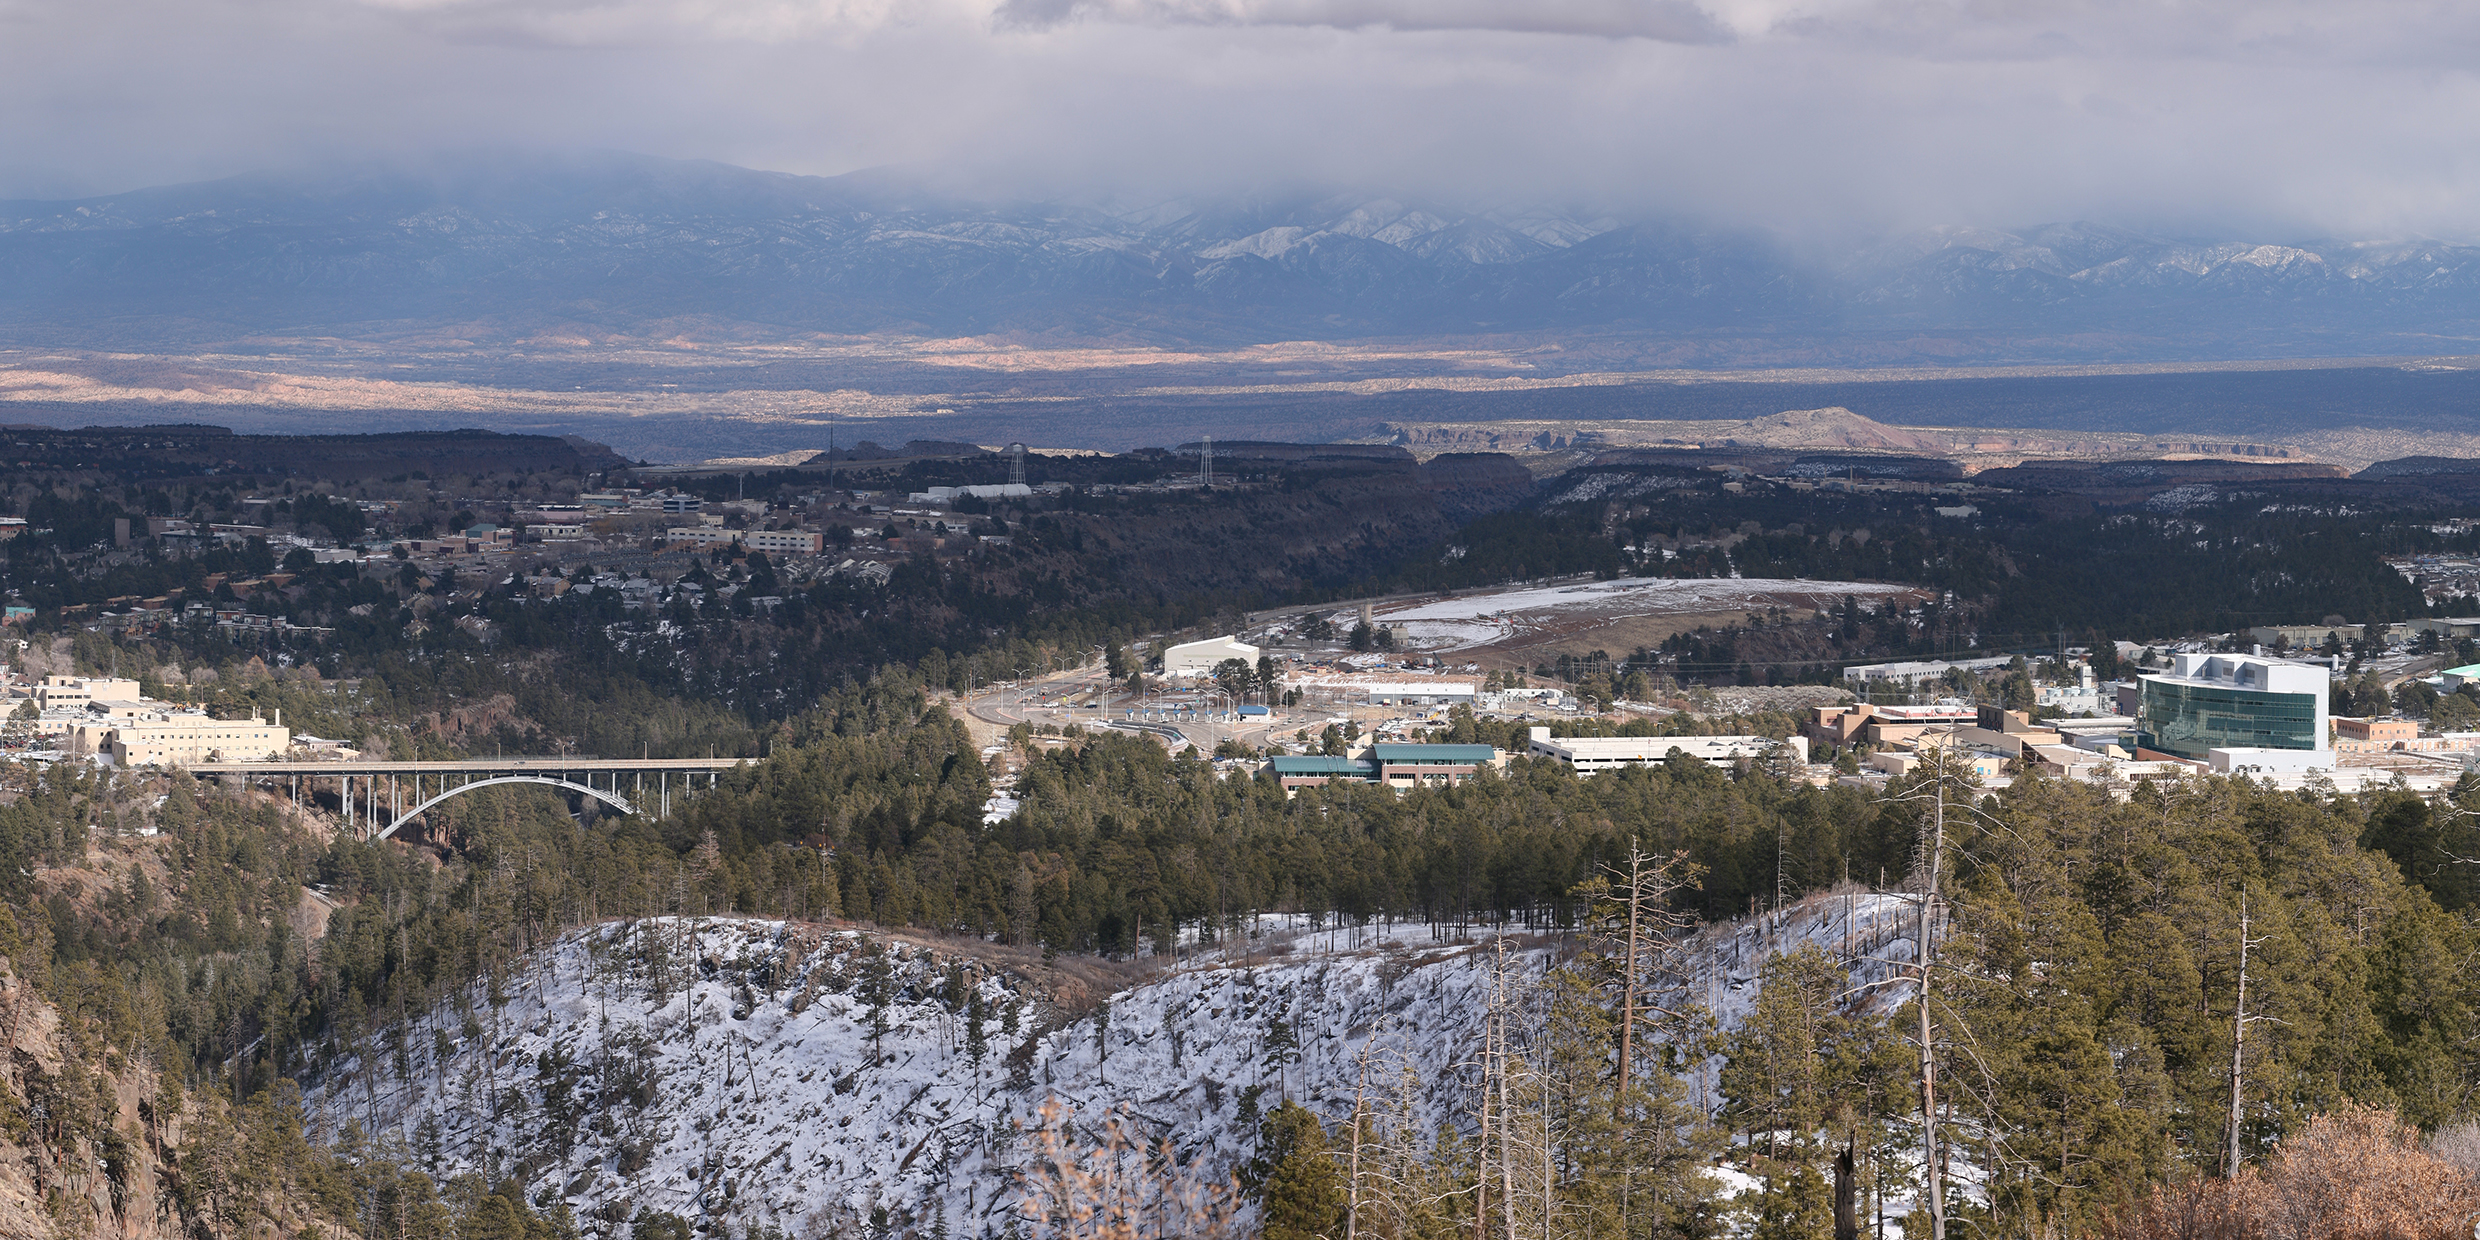 Image of Los Alamos from above